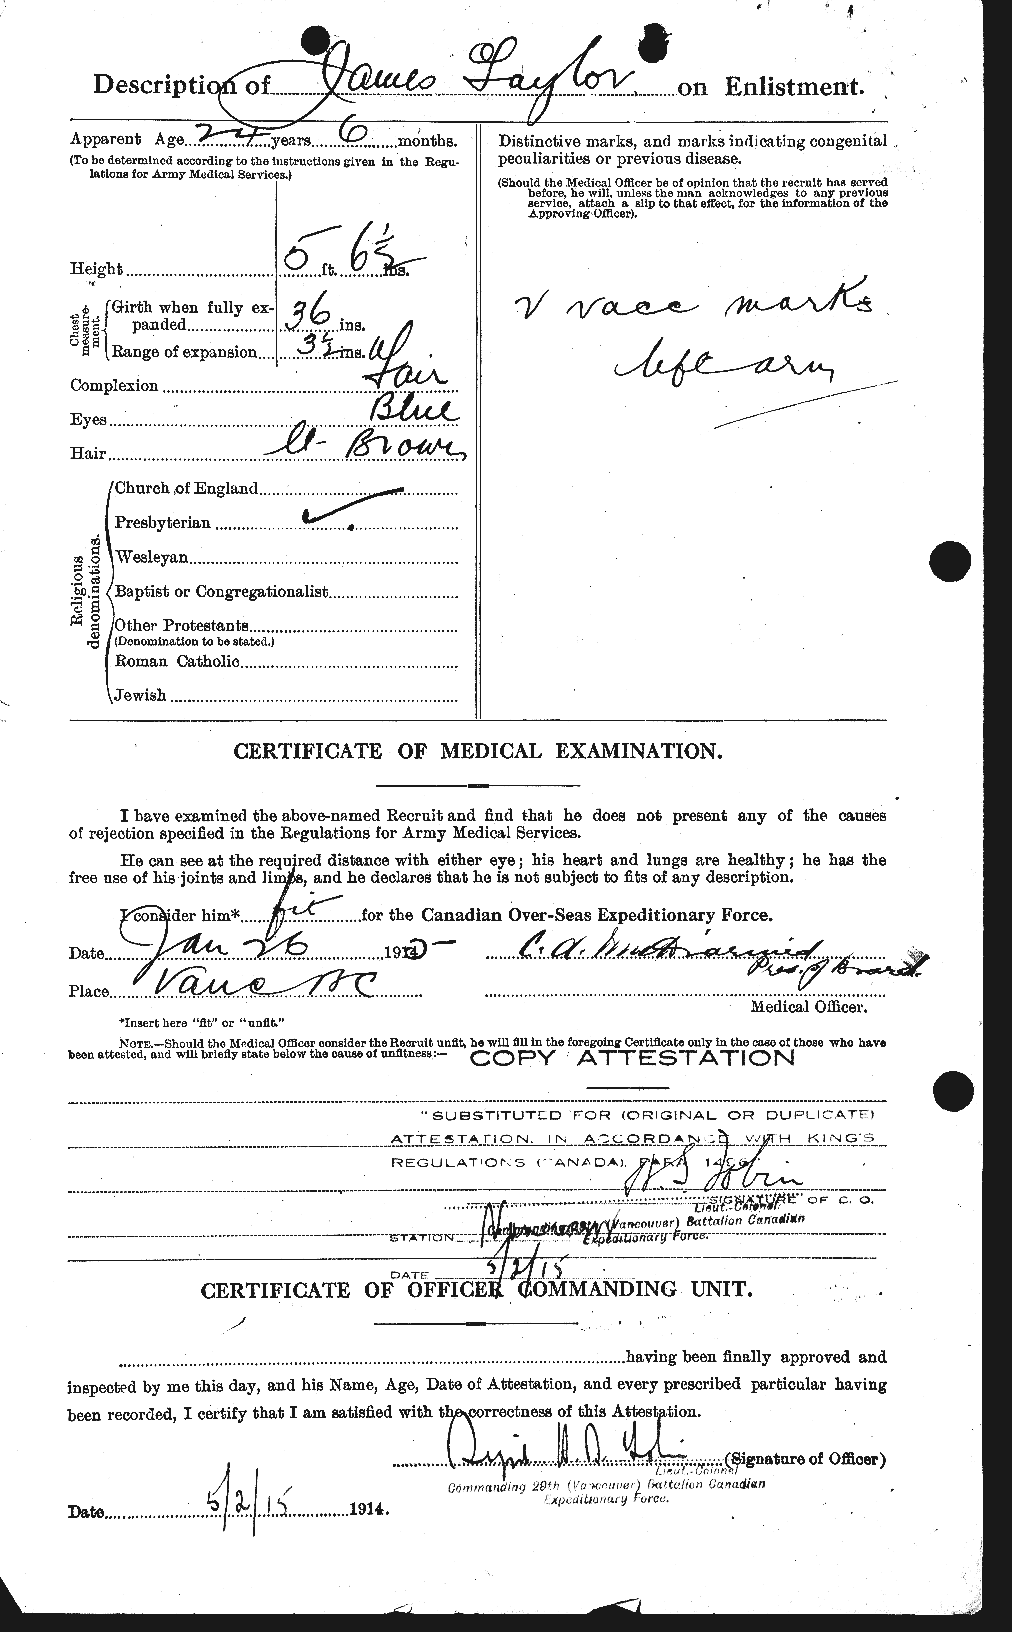 Personnel Records of the First World War - CEF 626892b